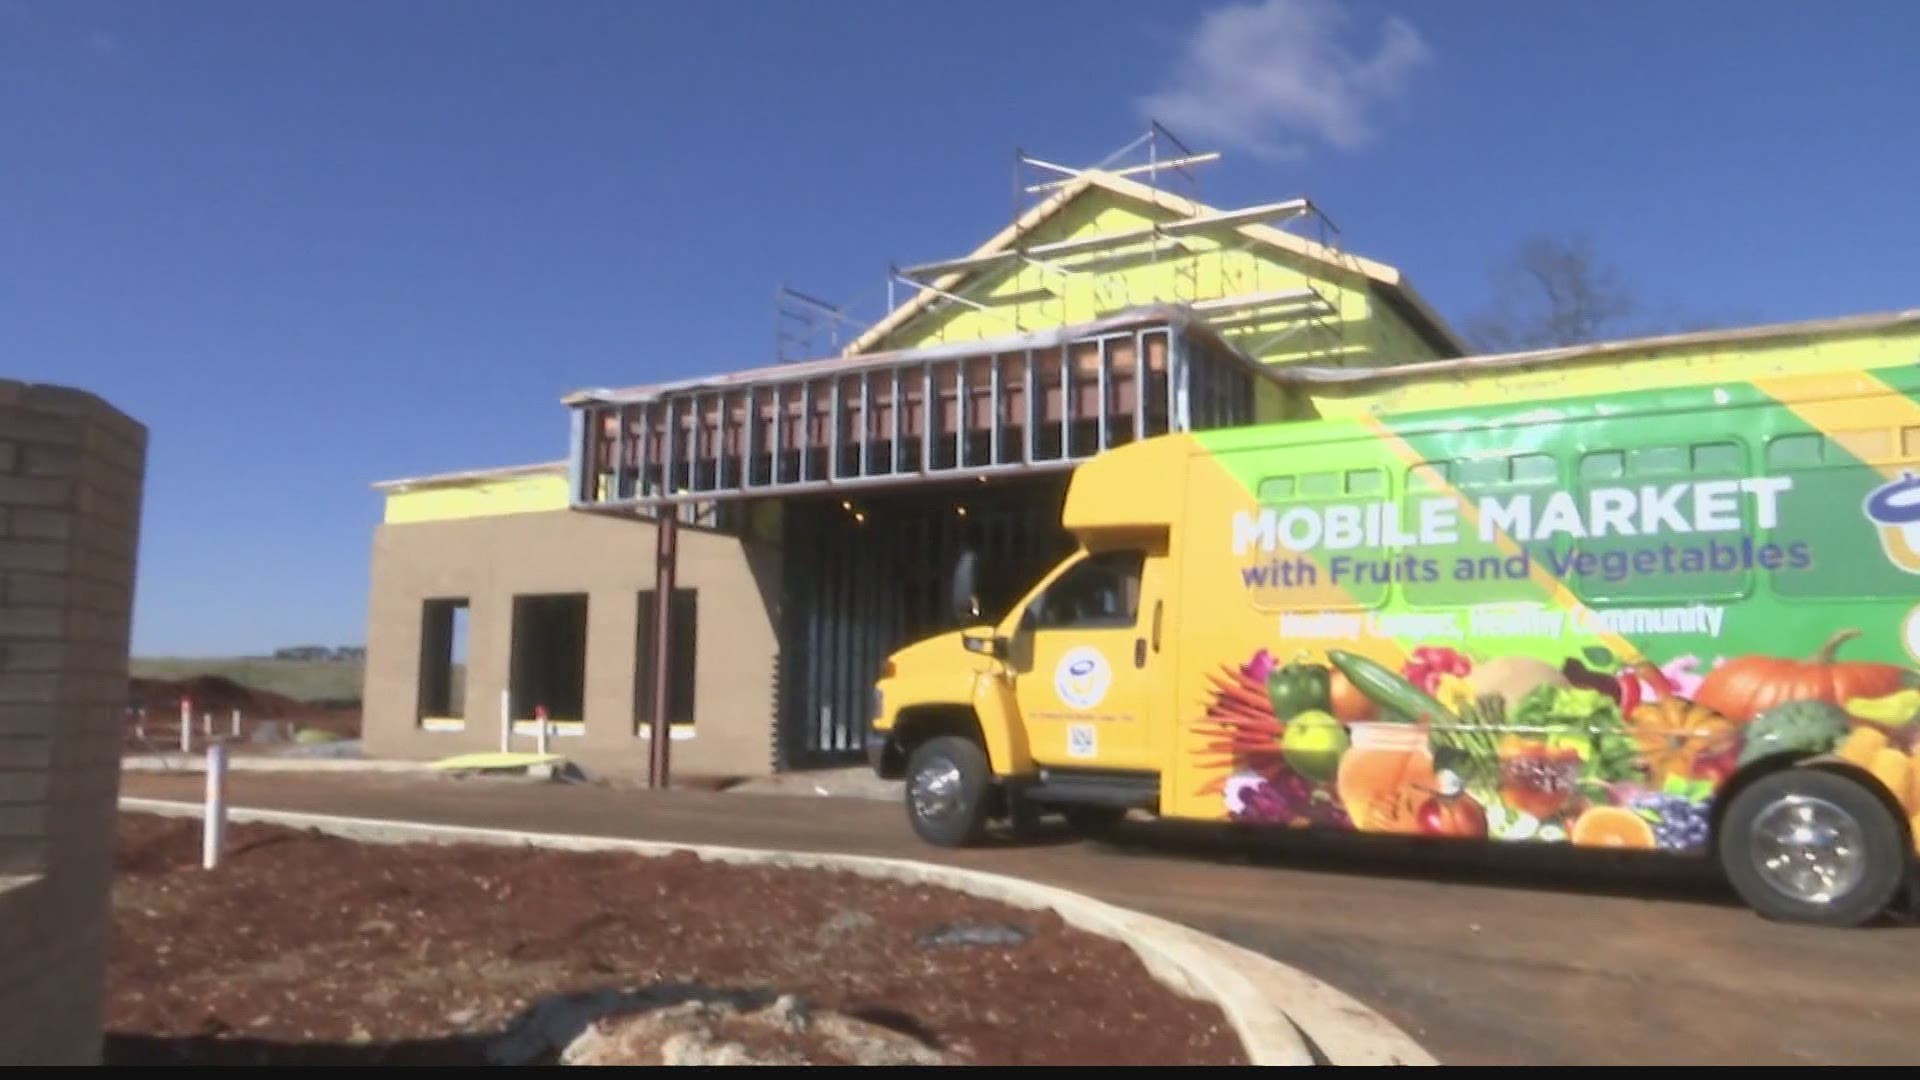 The new Mobile Market will stop at six locations, and will run biweekly on Monday, Wednesday, and Thursday from 1 p.m.-3:30 p.m.